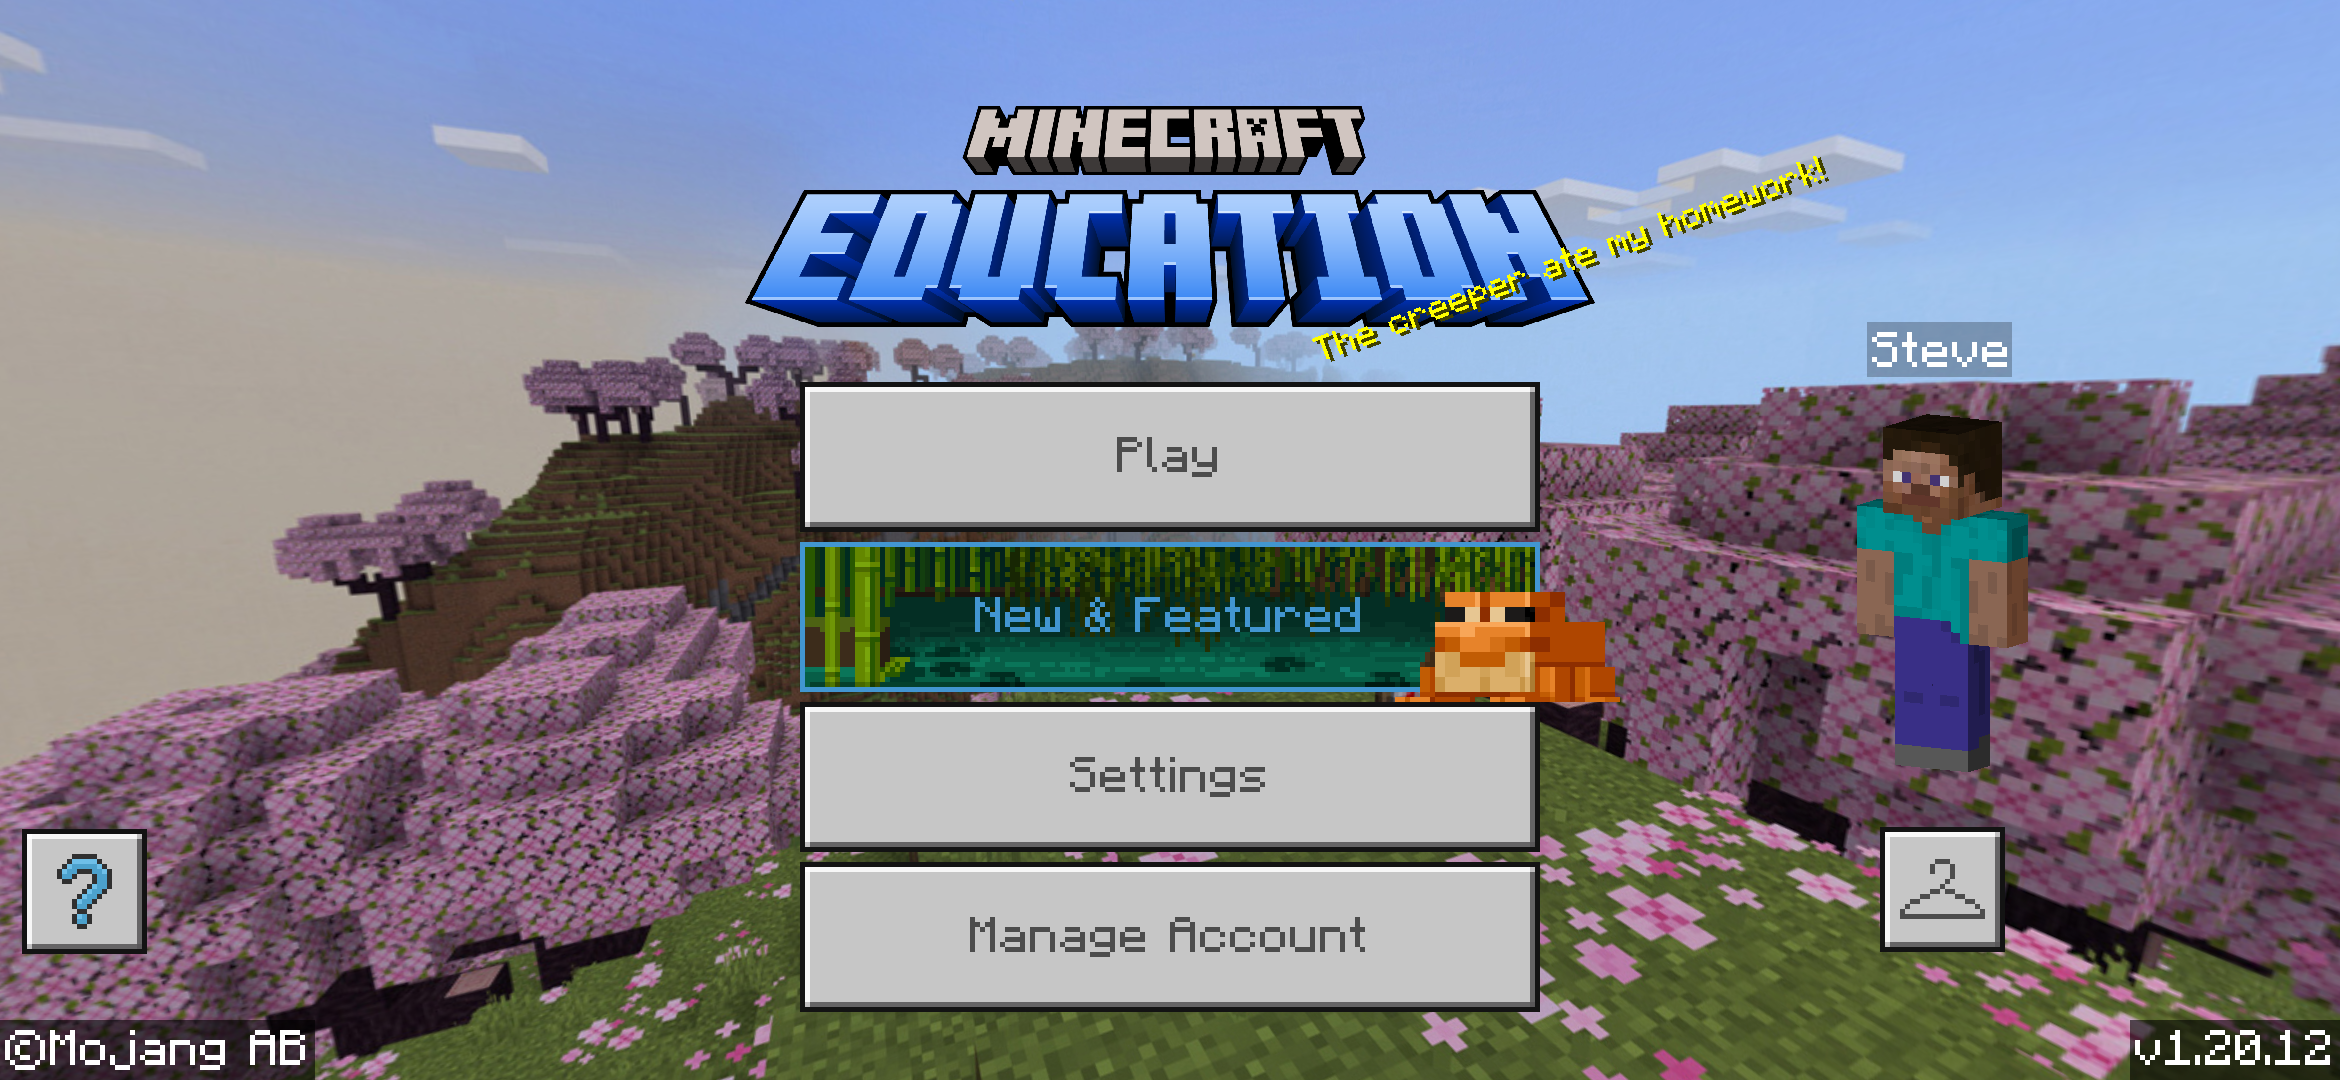 Learn to play Minecraft Education – Minecraft Education